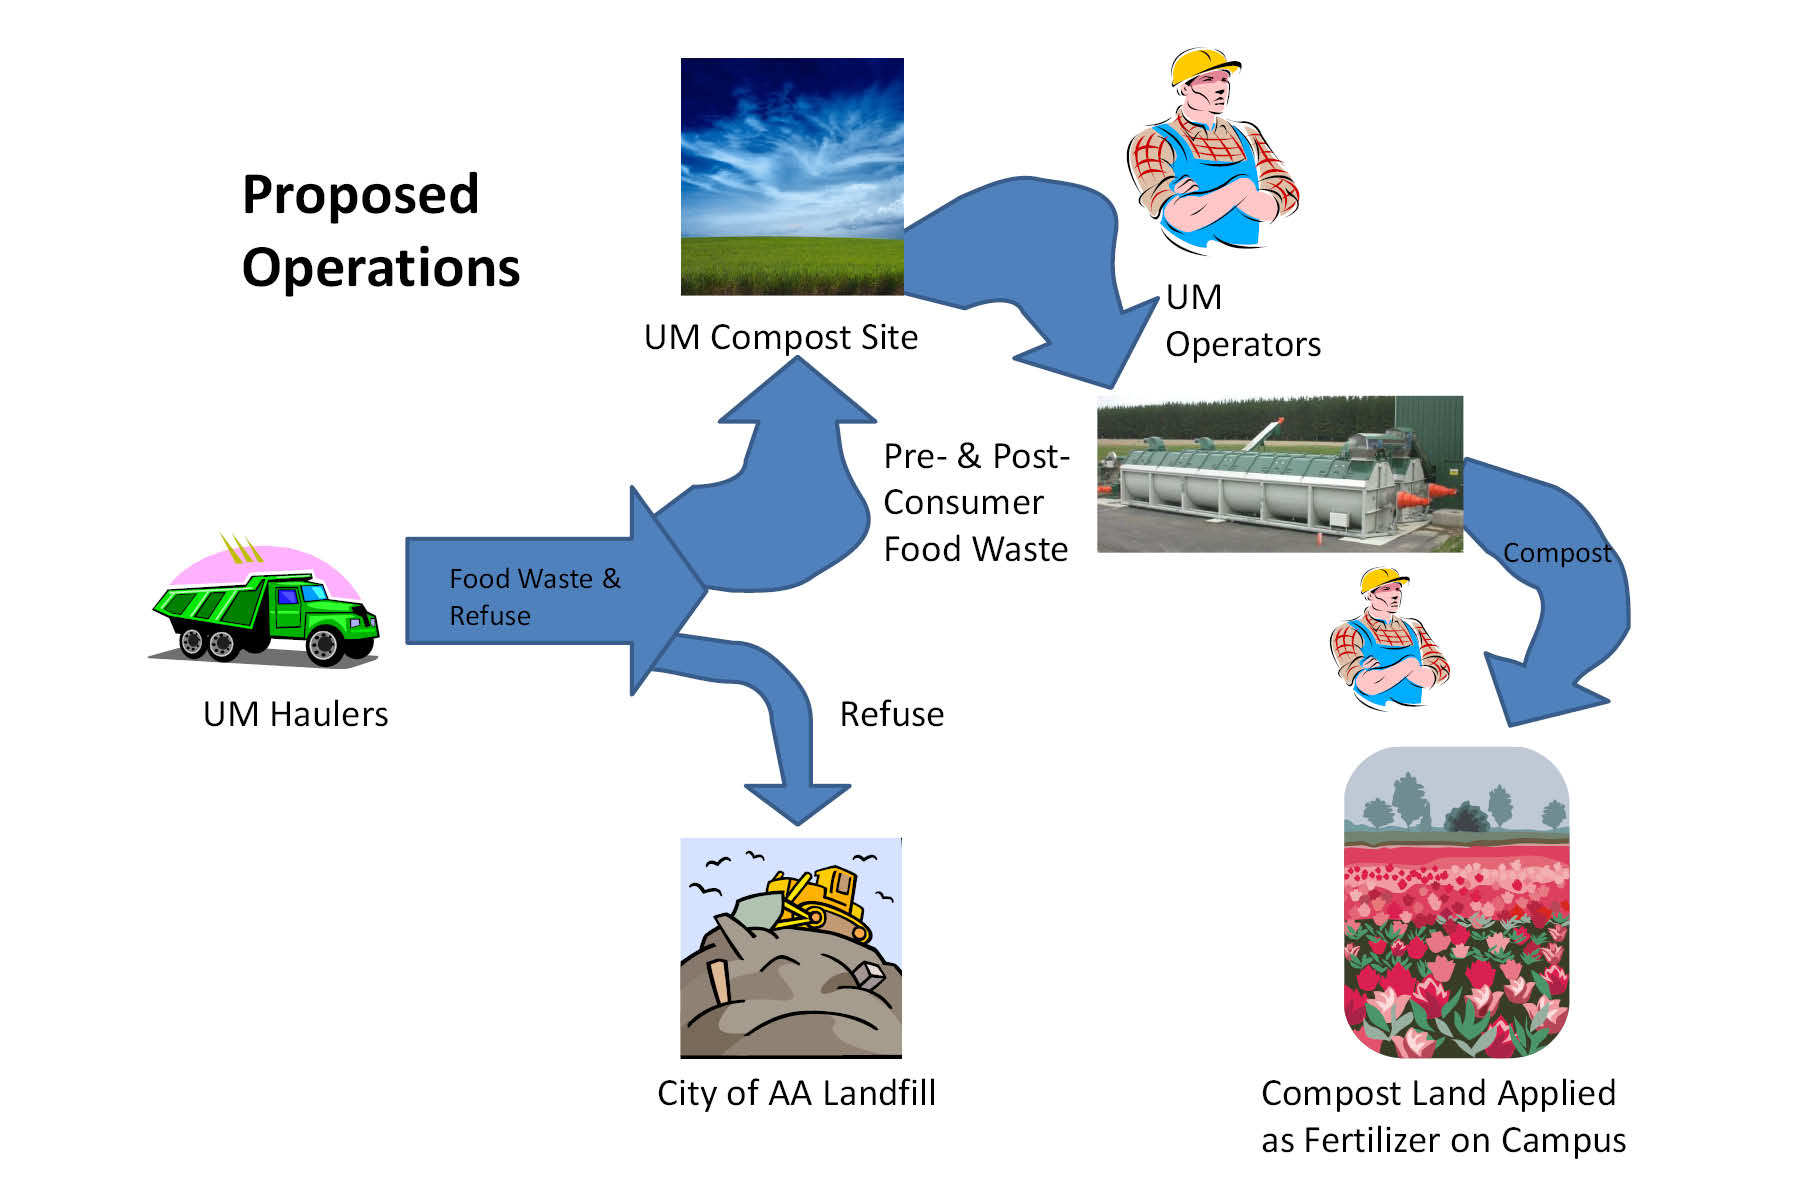 University of Michigan proposed compost operations